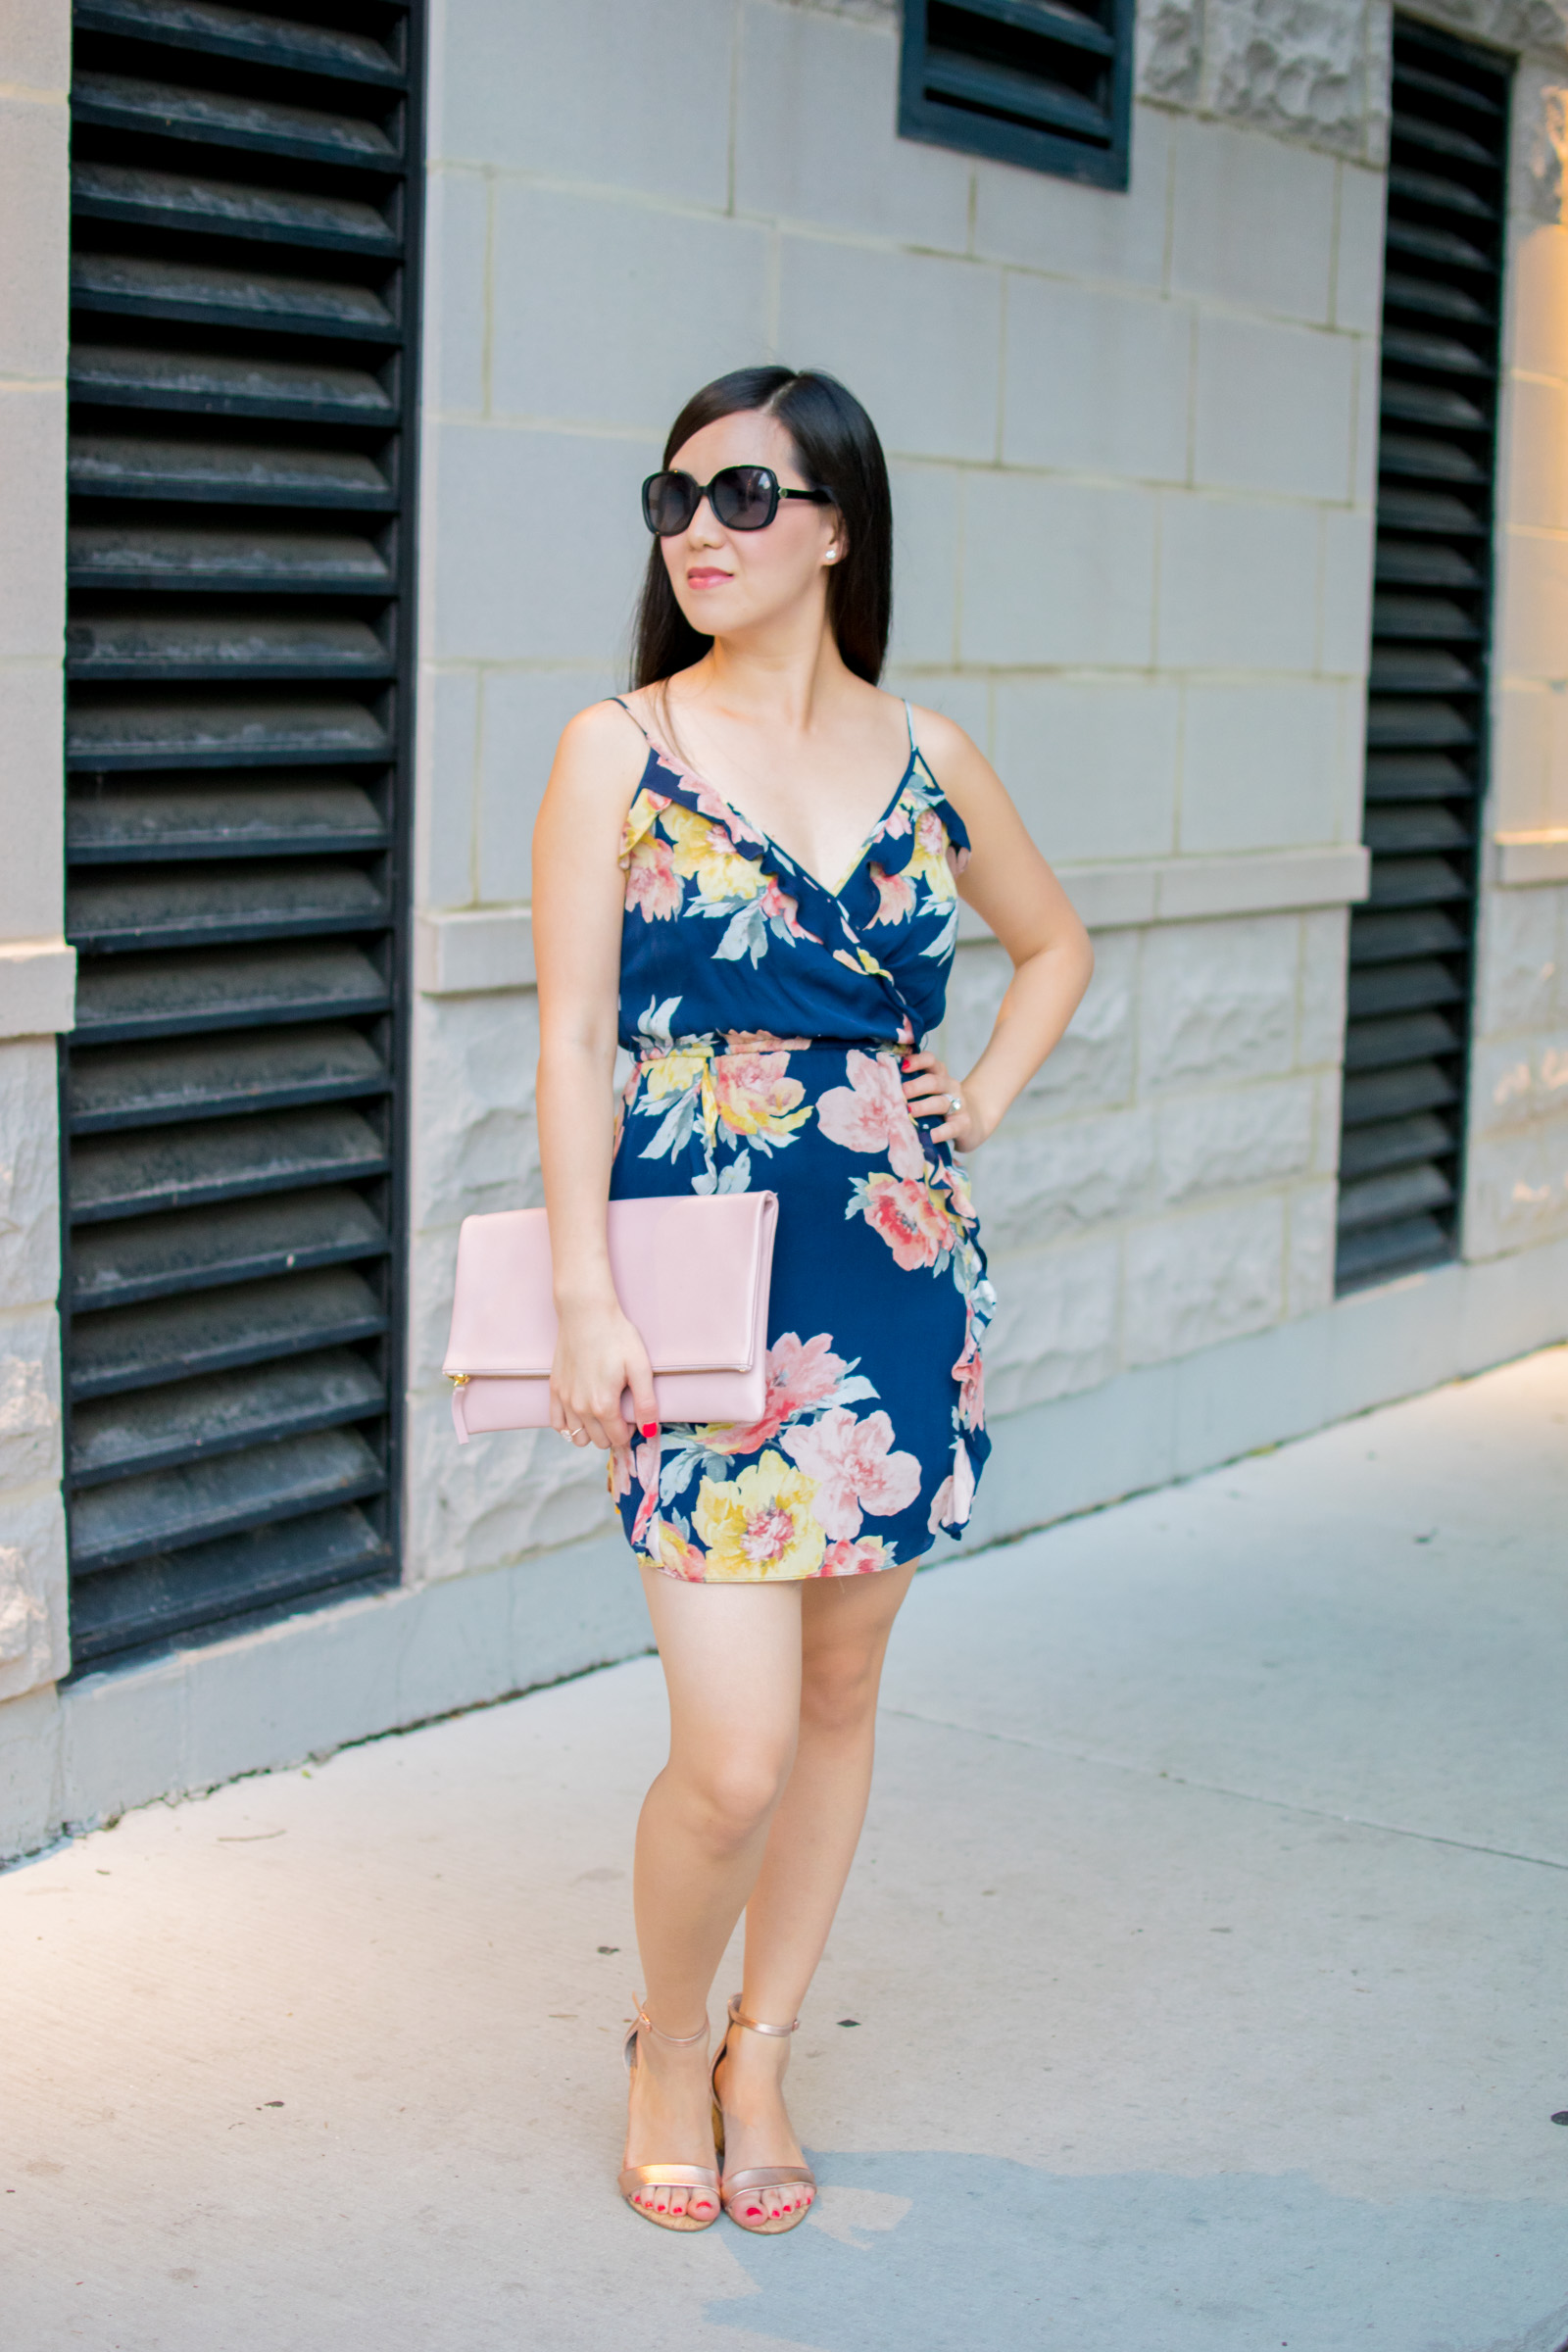 Outfit of the Day 7.17.18 - Joie Navy Floral Dress - Tia Perciballi